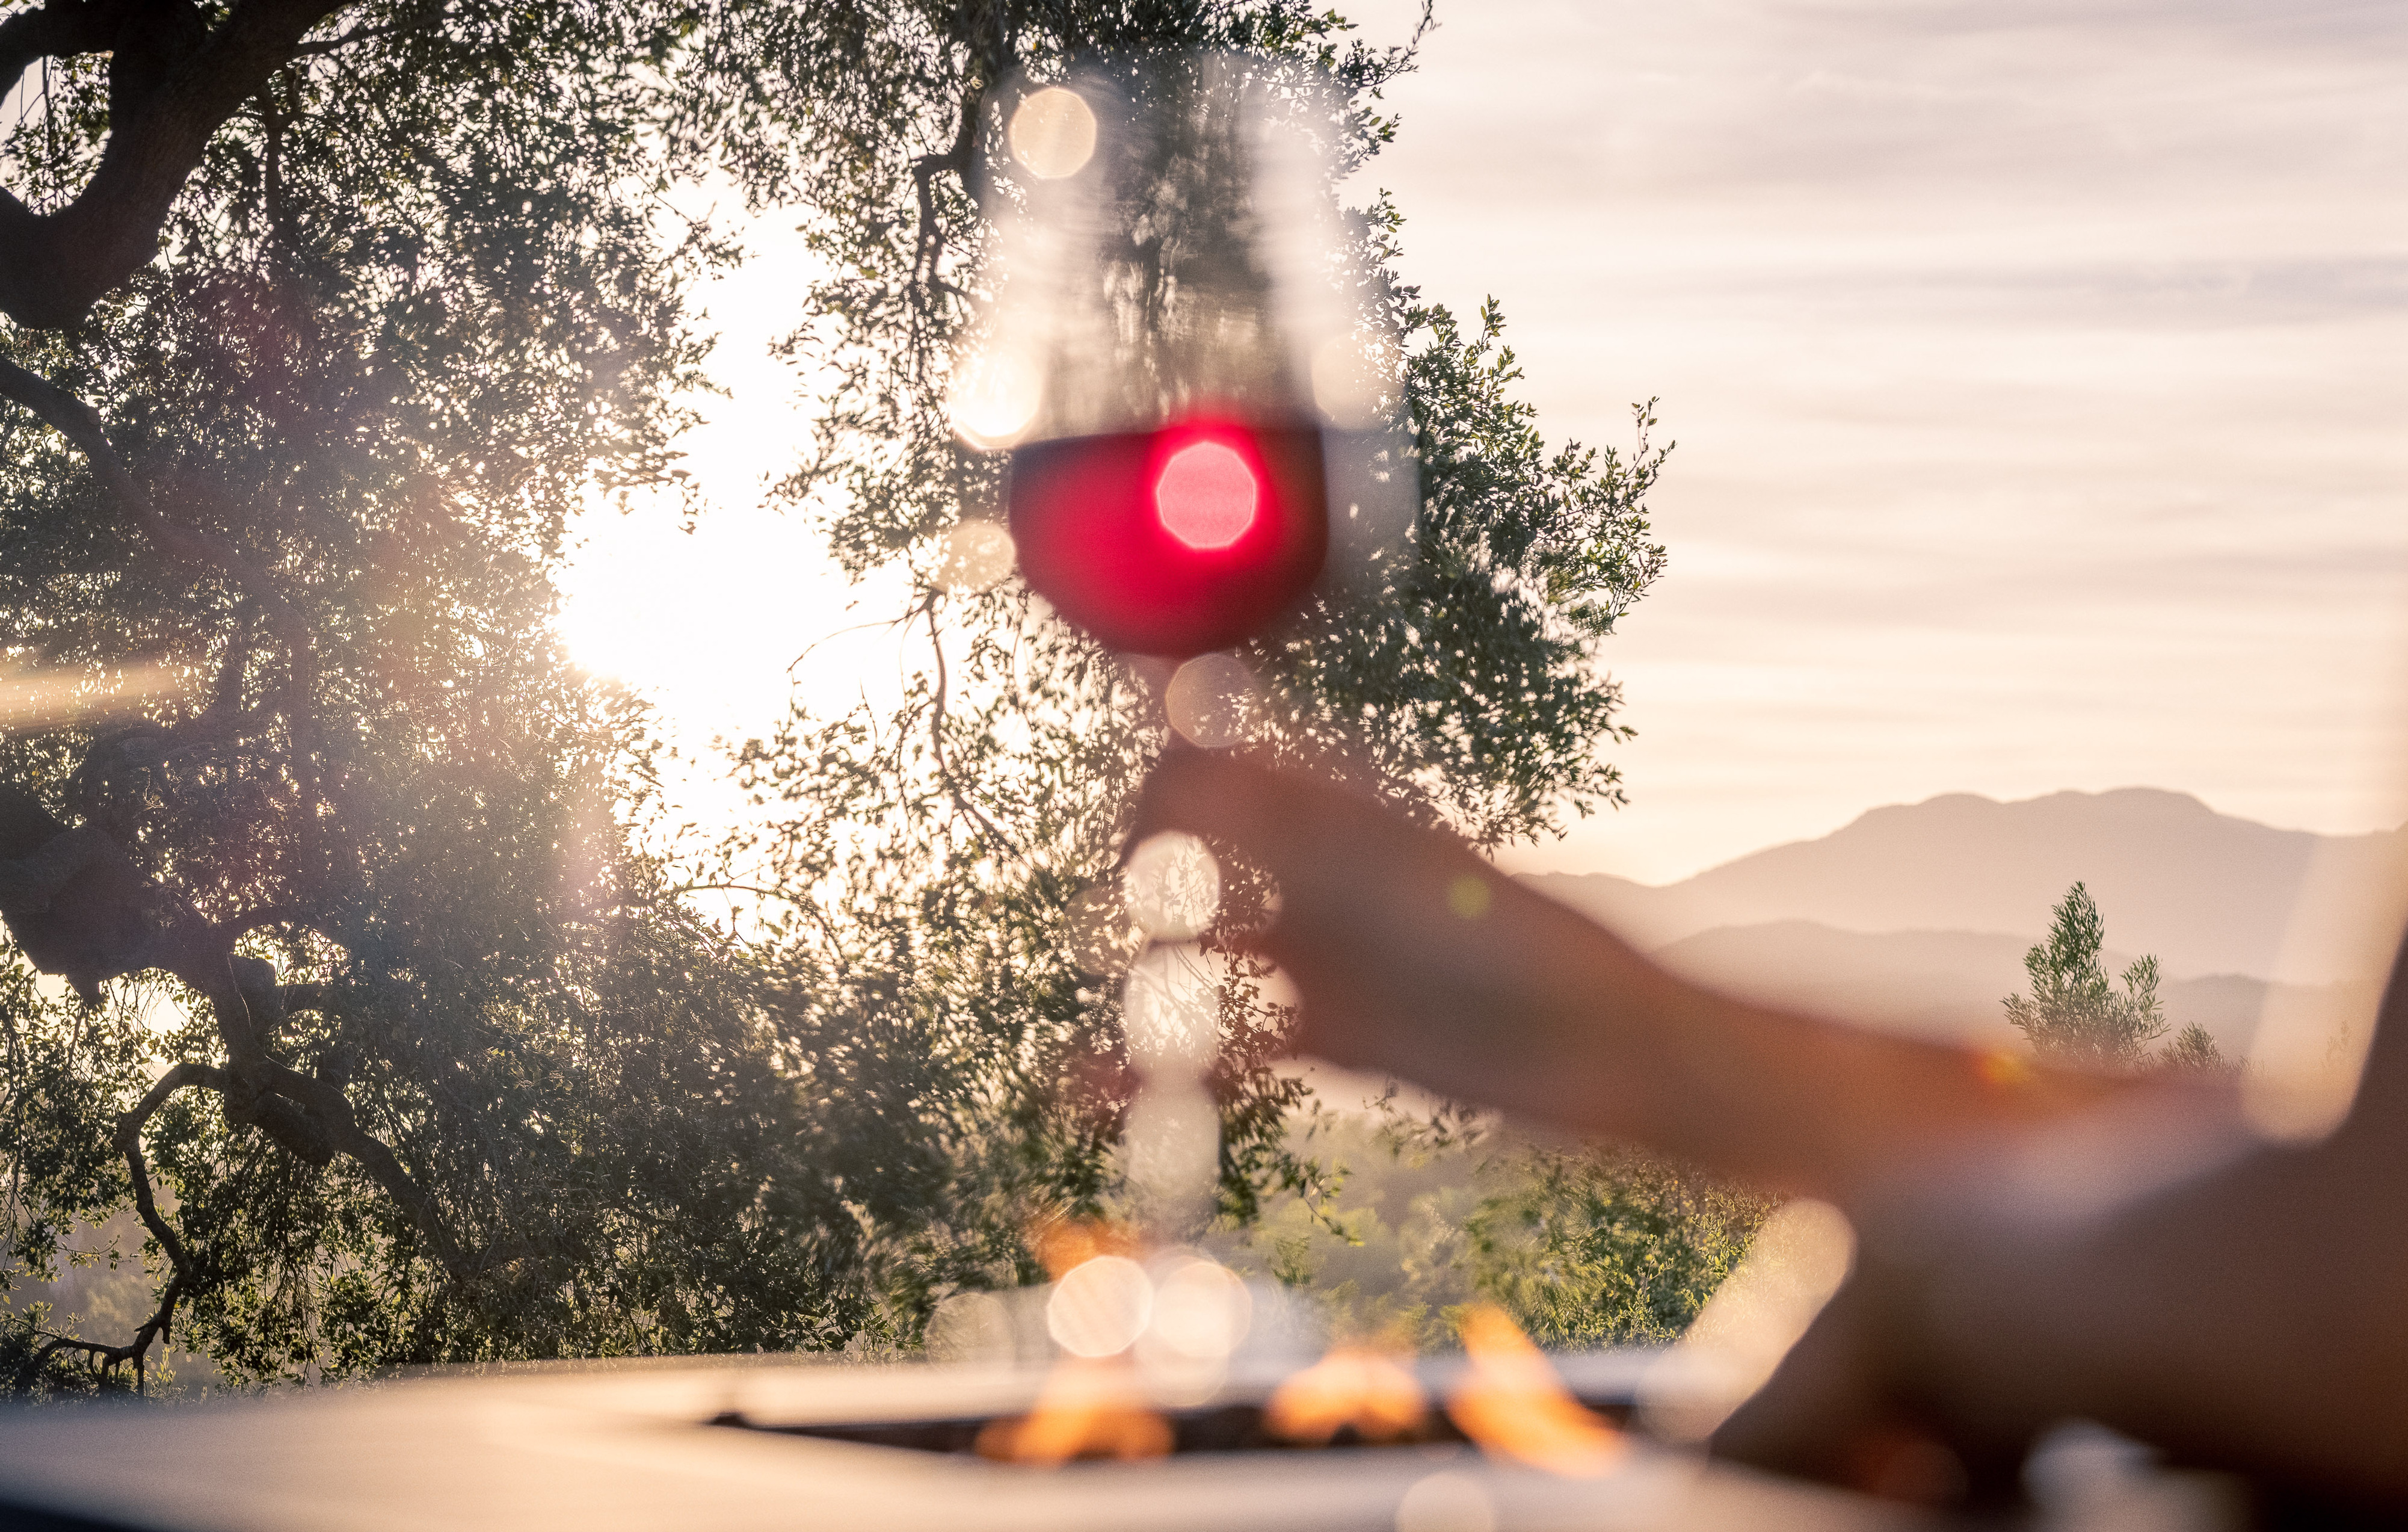 On-location Wine glass photography by Timothy Hogan in Los Angeles for Robert Mondavi Winery